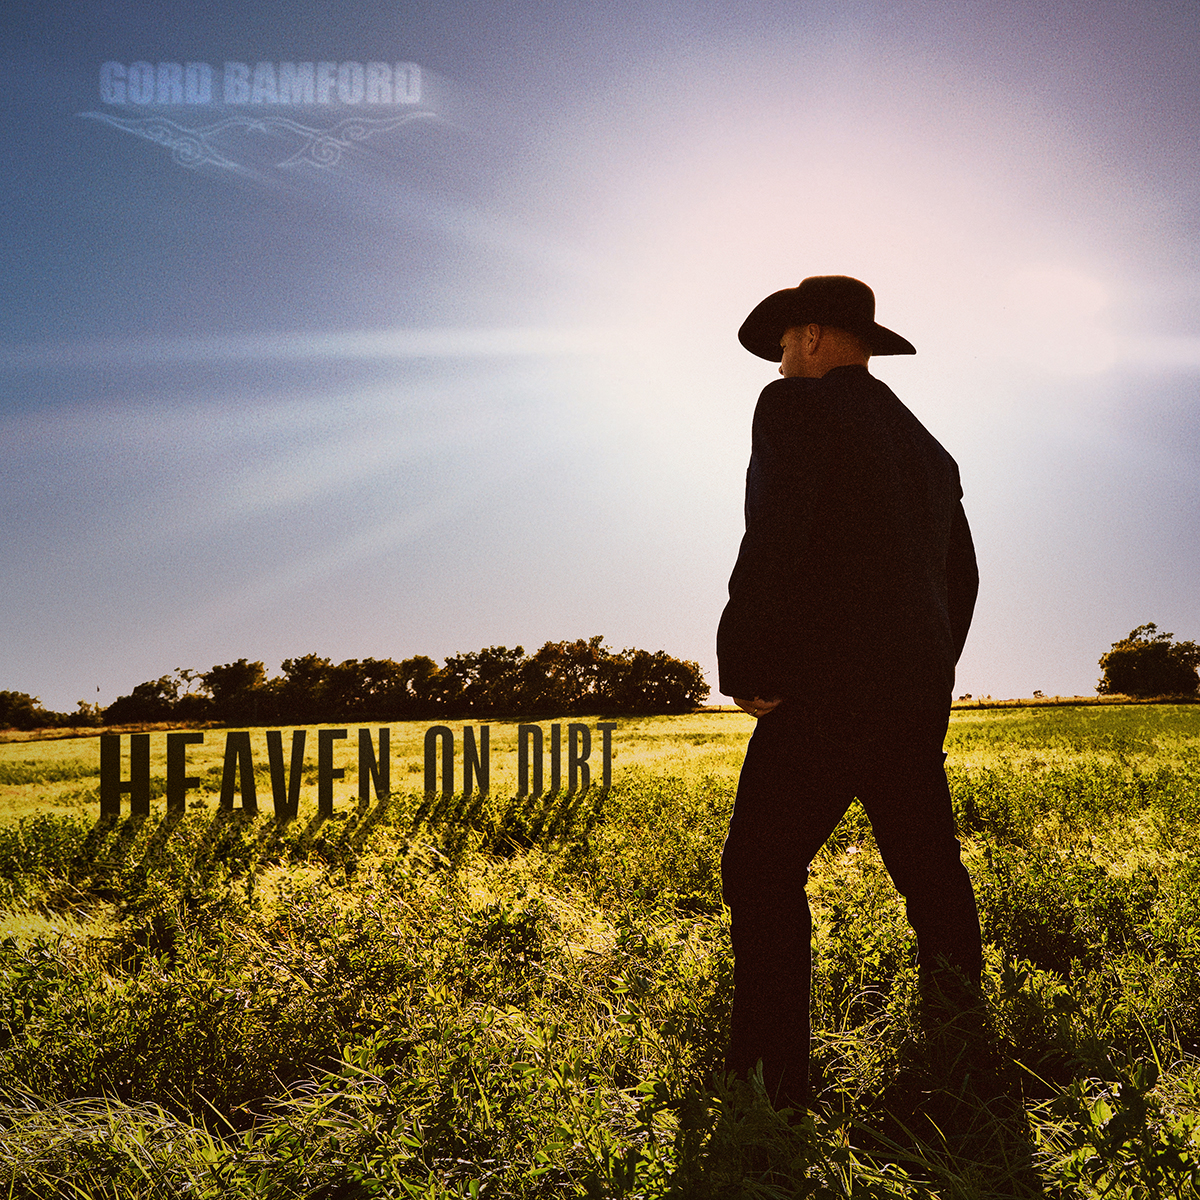 Gord Bamford Releases New Single “Heaven On Dirt” Off of Forthcoming New Album Due Out This Summer